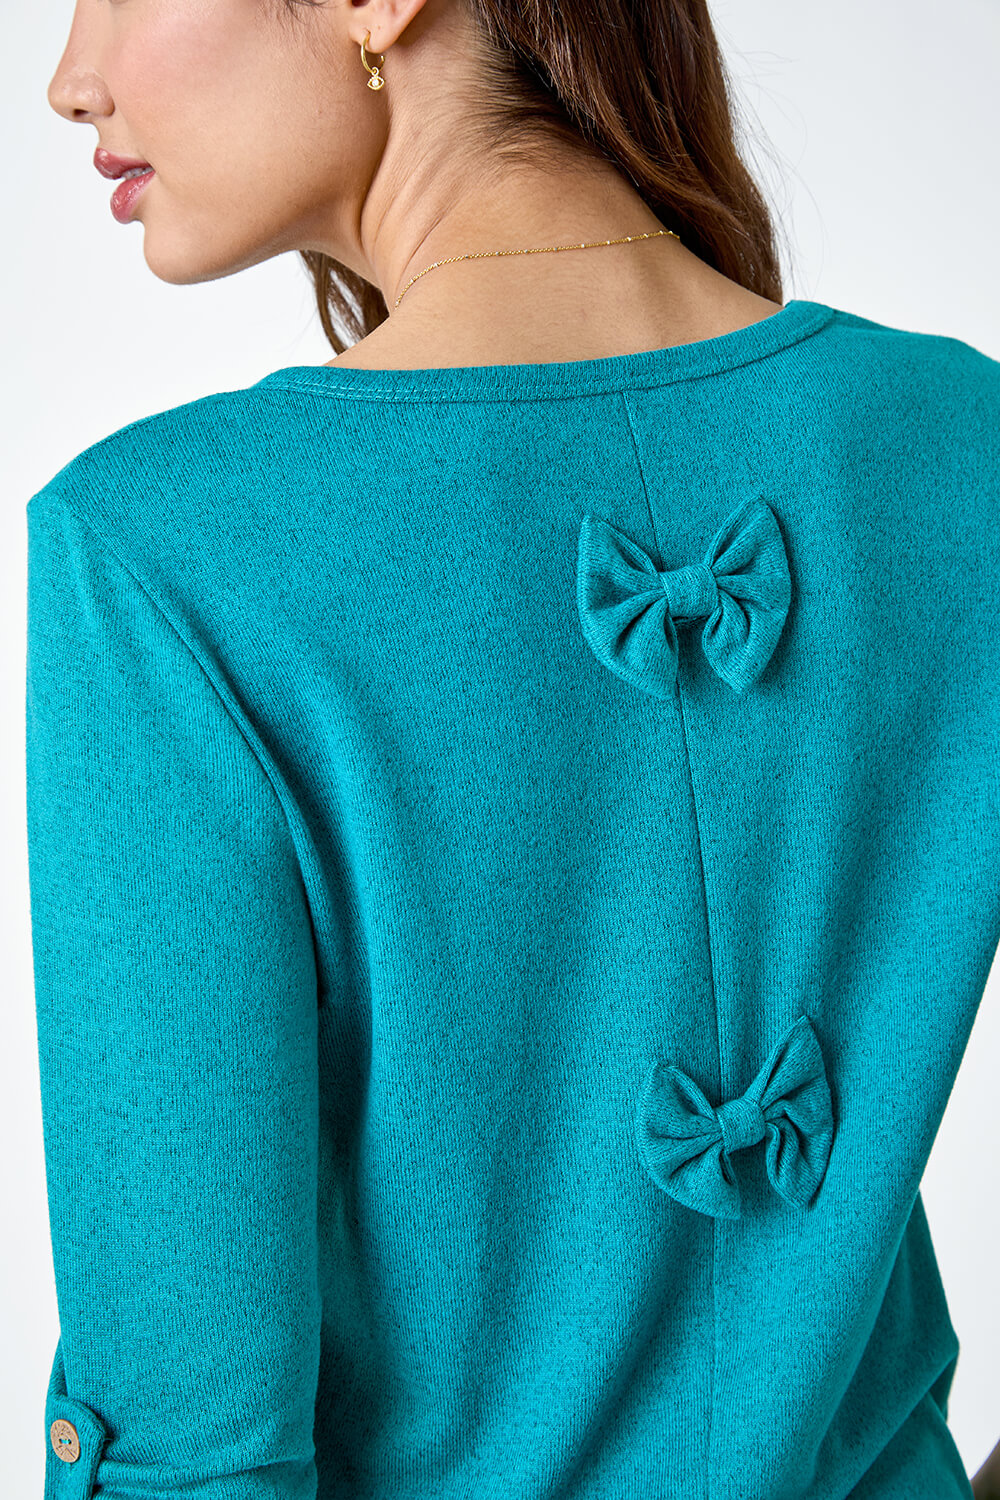 Teal Bow Back Detail Stretch Top, Image 5 of 5